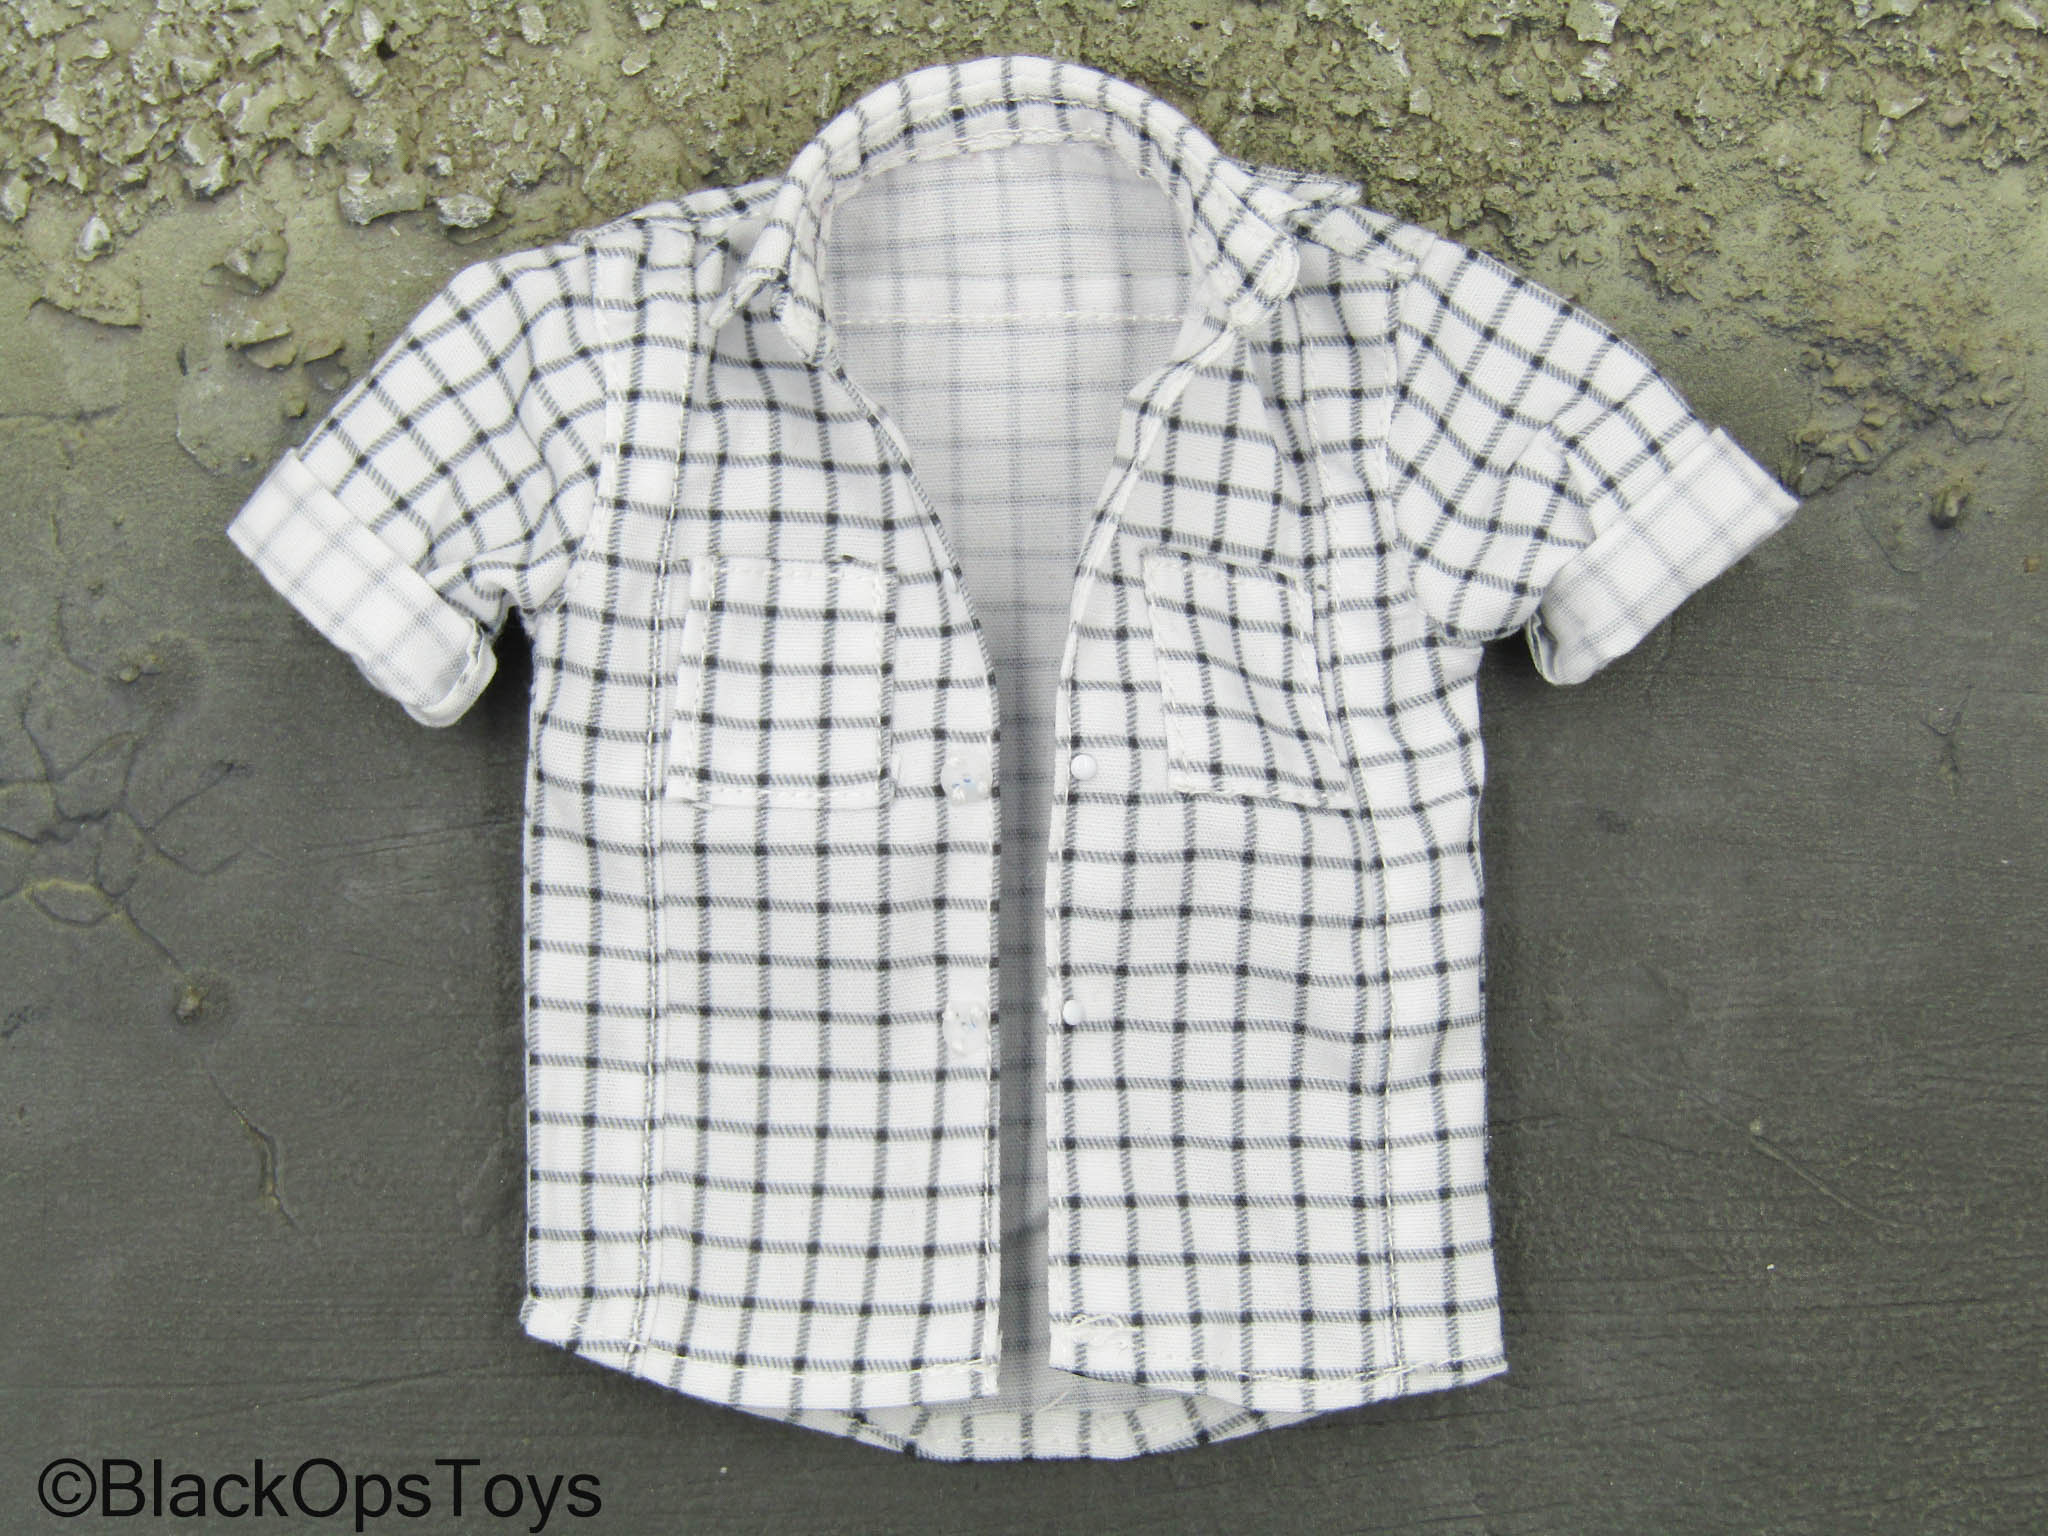 marty mcfly checkered shirt